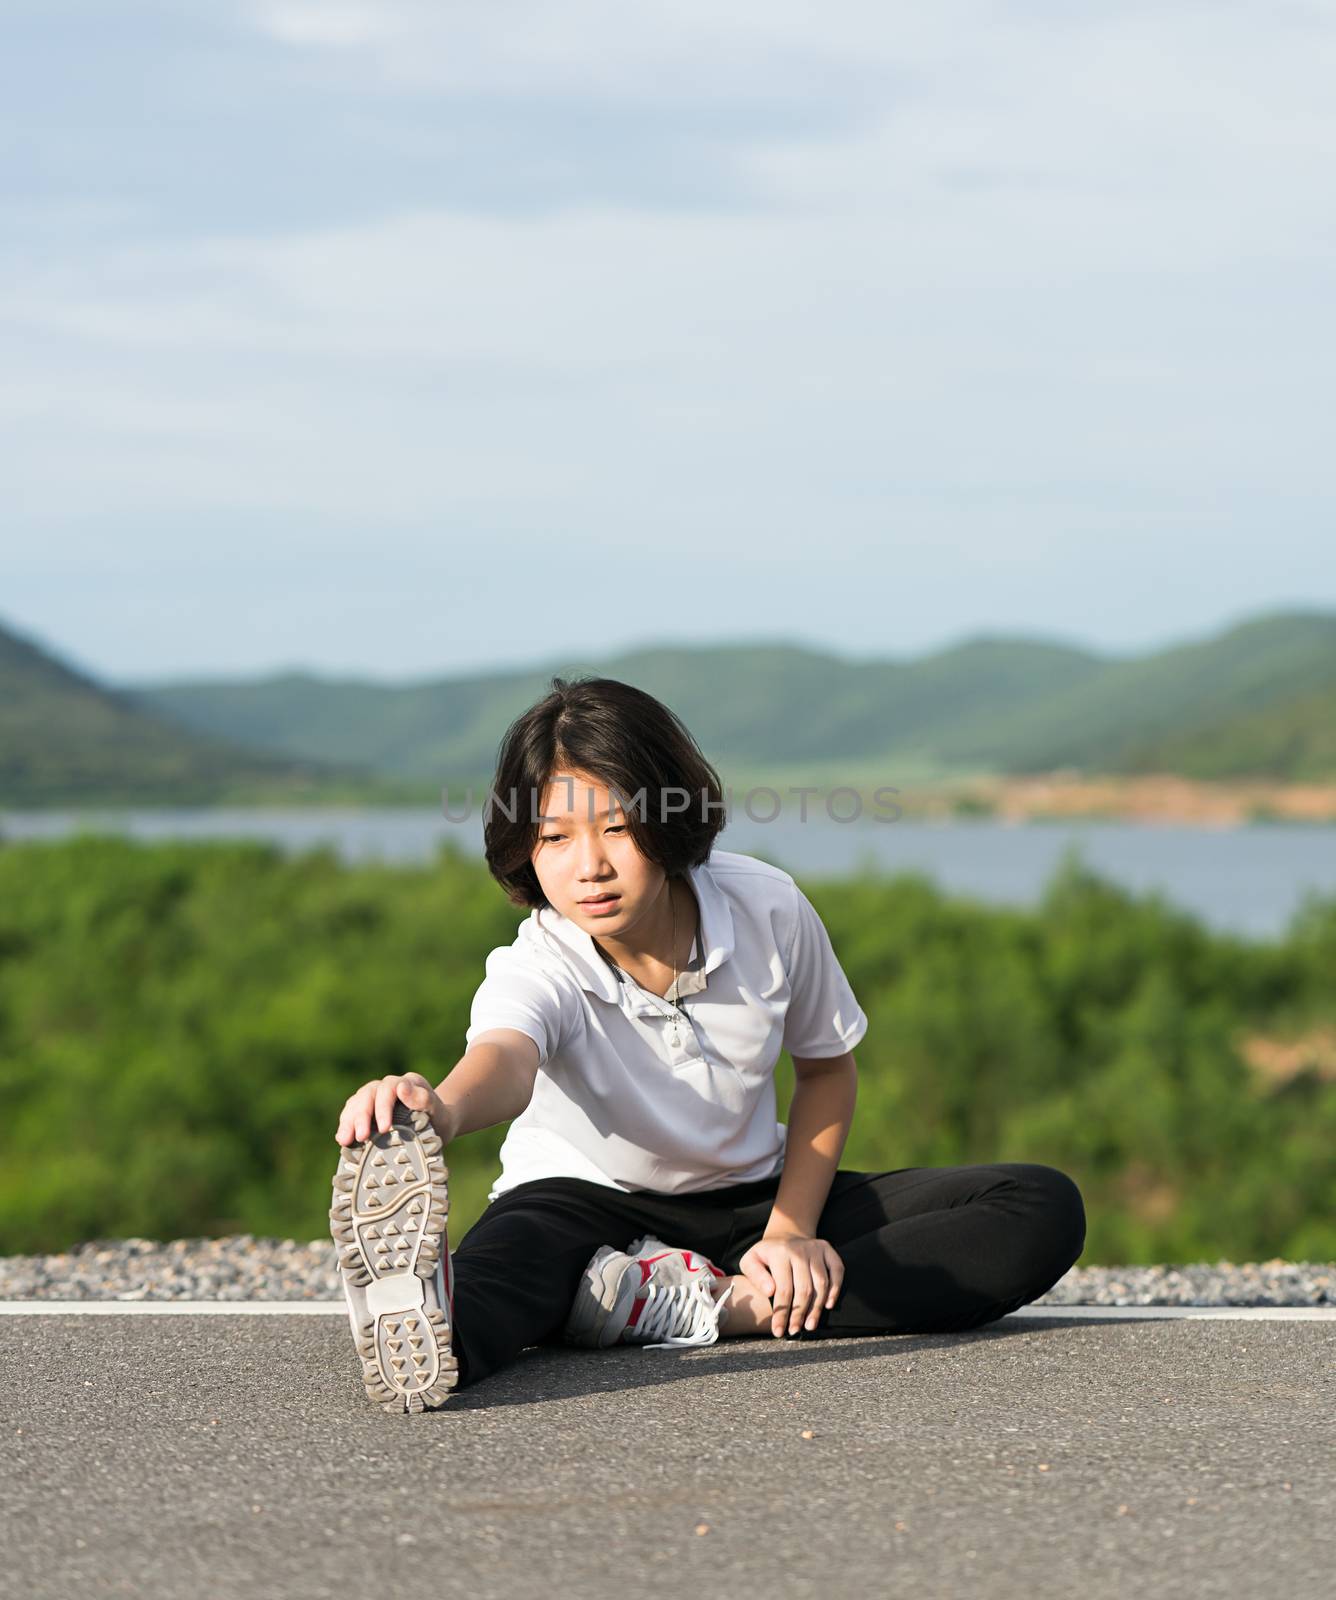 Woman runner doing exercises and warm up preparing for jogging outdoor